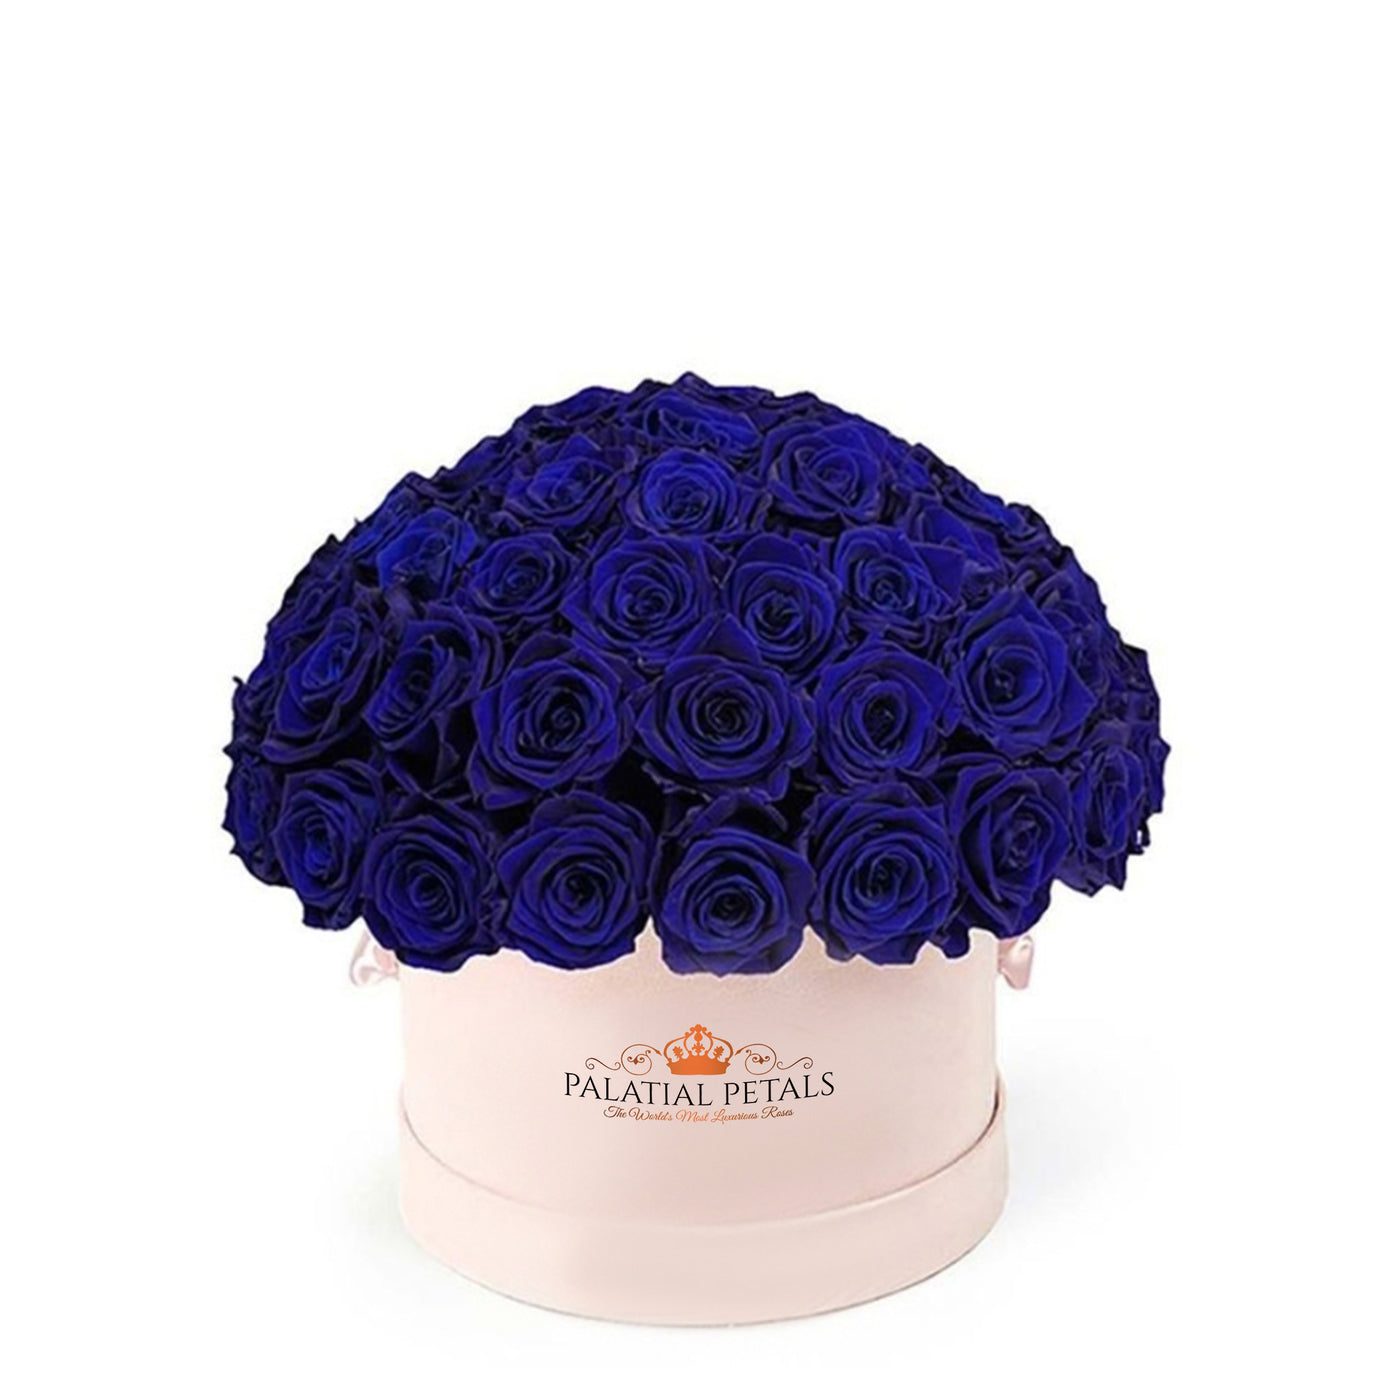 Royal Blue Roses That Last A Year - Classic "Crown"